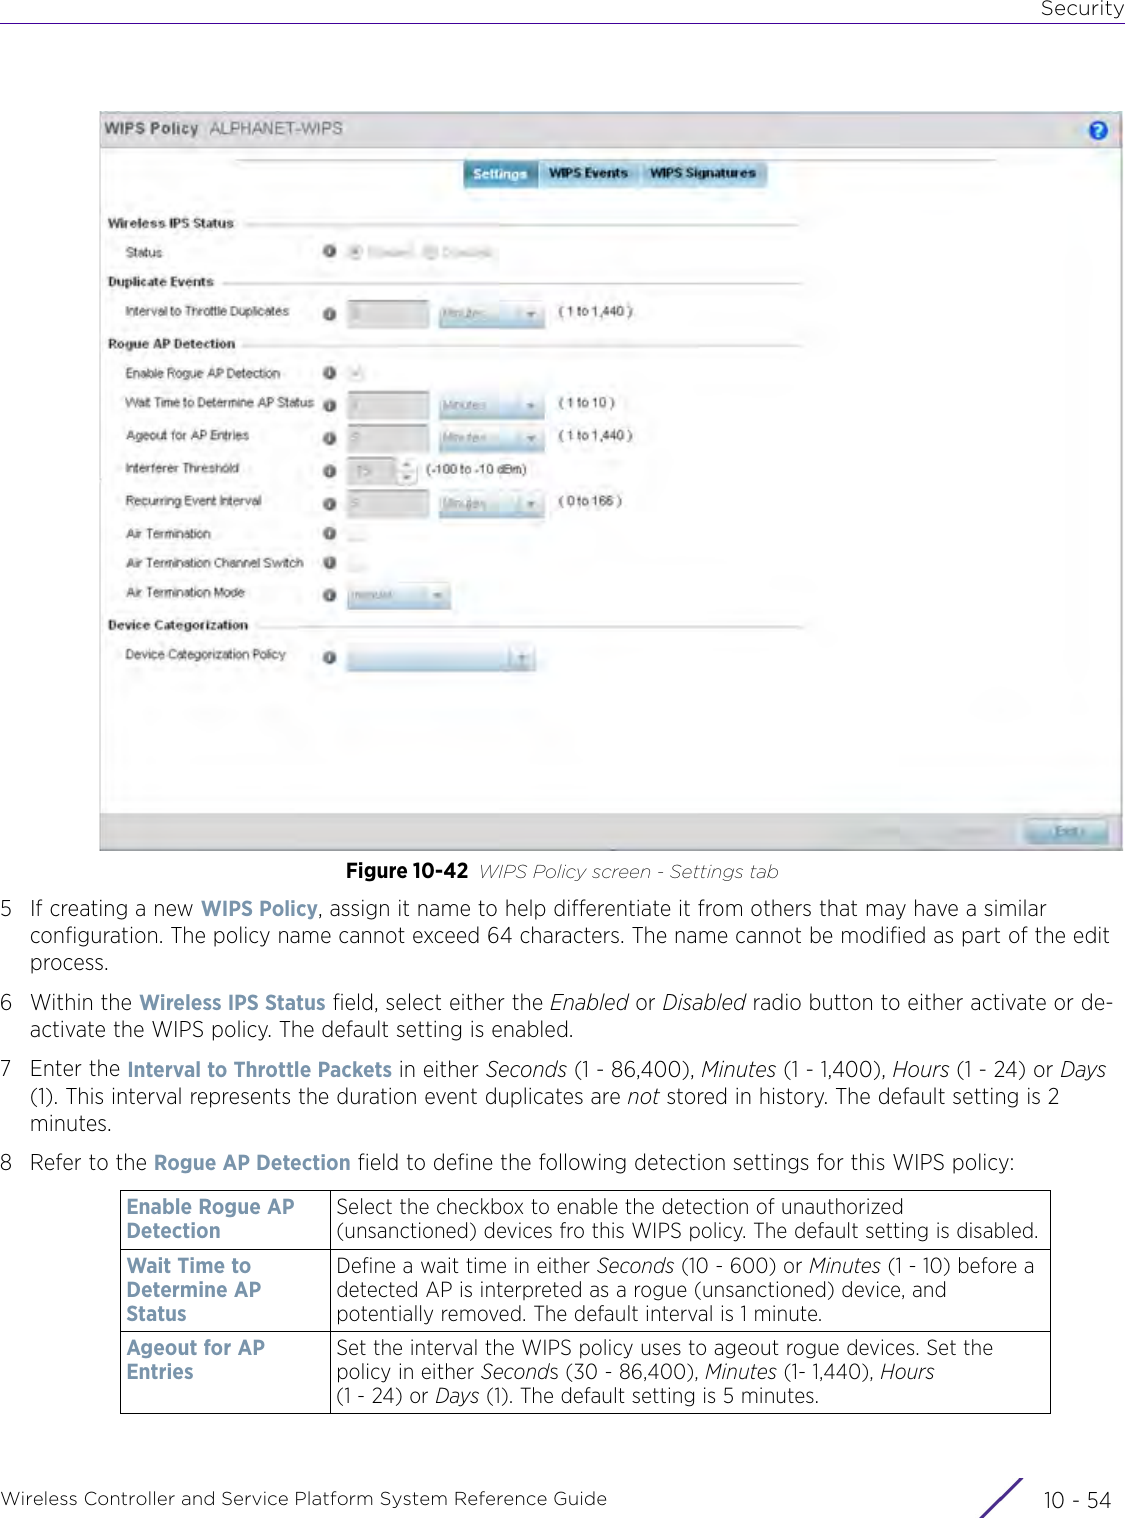 SecurityWireless Controller and Service Platform System Reference Guide  10 - 54Figure 10-42 WIPS Policy screen - Settings tab5 If creating a new WIPS Policy, assign it name to help differentiate it from others that may have a similar configuration. The policy name cannot exceed 64 characters. The name cannot be modified as part of the edit process.6Within the Wireless IPS Status field, select either the Enabled or Disabled radio button to either activate or de-activate the WIPS policy. The default setting is enabled.7Enter the Interval to Throttle Packets in either Seconds (1 - 86,400), Minutes (1 - 1,400), Hours (1 - 24) or Days (1). This interval represents the duration event duplicates are not stored in history. The default setting is 2 minutes.8 Refer to the Rogue AP Detection field to define the following detection settings for this WIPS policy:Enable Rogue AP DetectionSelect the checkbox to enable the detection of unauthorized (unsanctioned) devices fro this WIPS policy. The default setting is disabled.Wait Time to Determine AP StatusDefine a wait time in either Seconds (10 - 600) or Minutes (1 - 10) before a detected AP is interpreted as a rogue (unsanctioned) device, and potentially removed. The default interval is 1 minute.Ageout for AP EntriesSet the interval the WIPS policy uses to ageout rogue devices. Set the policy in either Seconds (30 - 86,400), Minutes (1- 1,440), Hours (1 - 24) or Days (1). The default setting is 5 minutes.